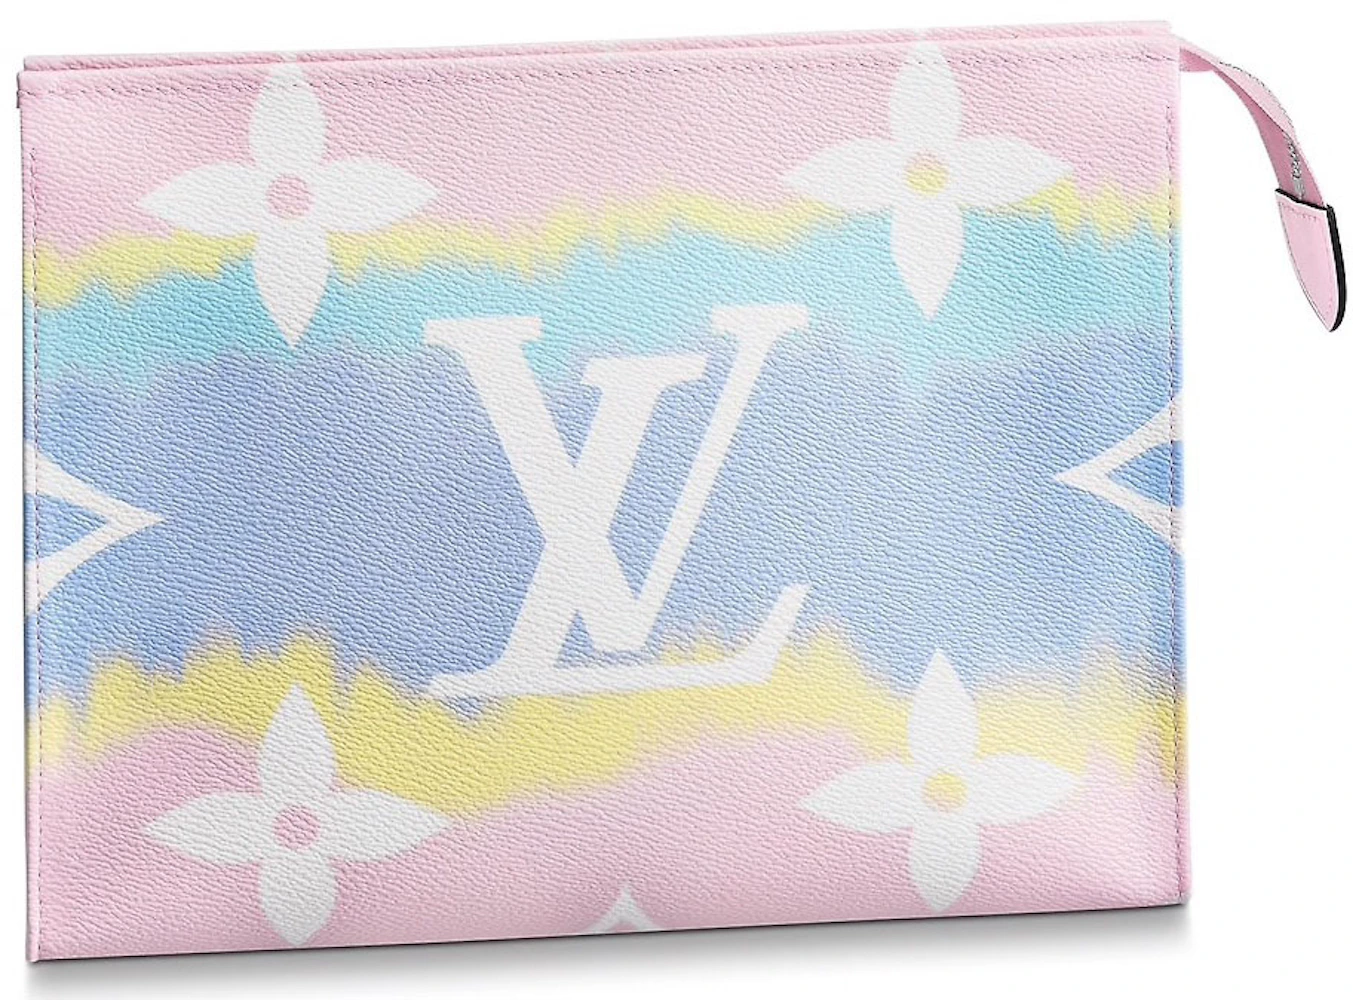 Louis Vuitton's Video Tape Clutch Is The Retro Accessory To Watch For SS20